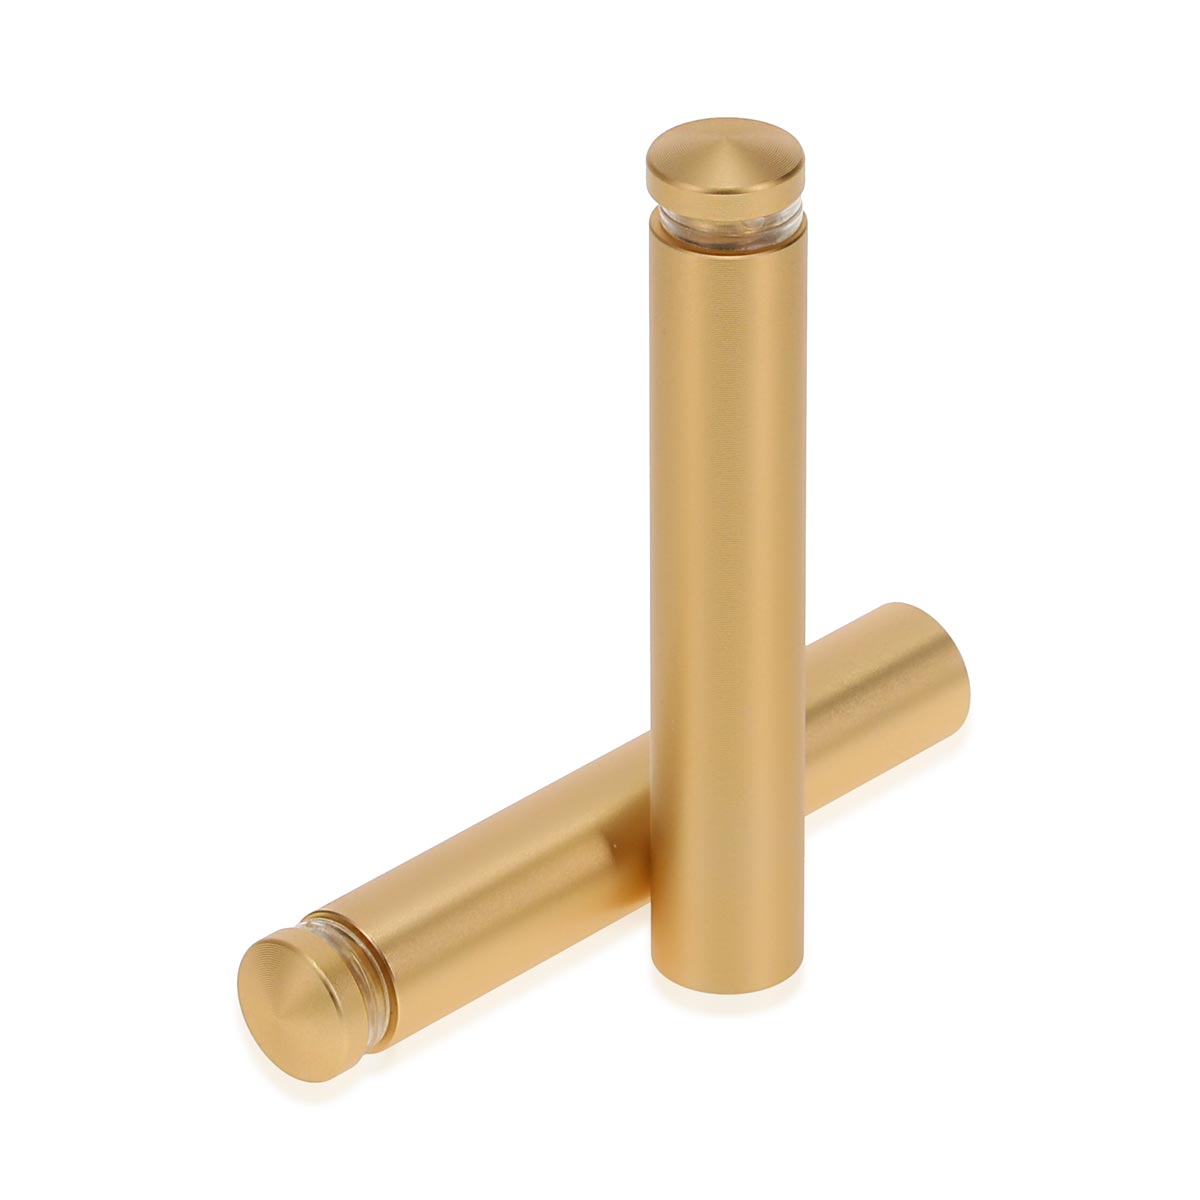 1/2'' Diameter X 2-1/2'' Barrel Length, Aluminum Rounded Head Standoffs, Matte Champagne Anodized Finish Easy Fasten Standoff (For Inside / Outside use) [Required Material Hole Size: 3/8'']